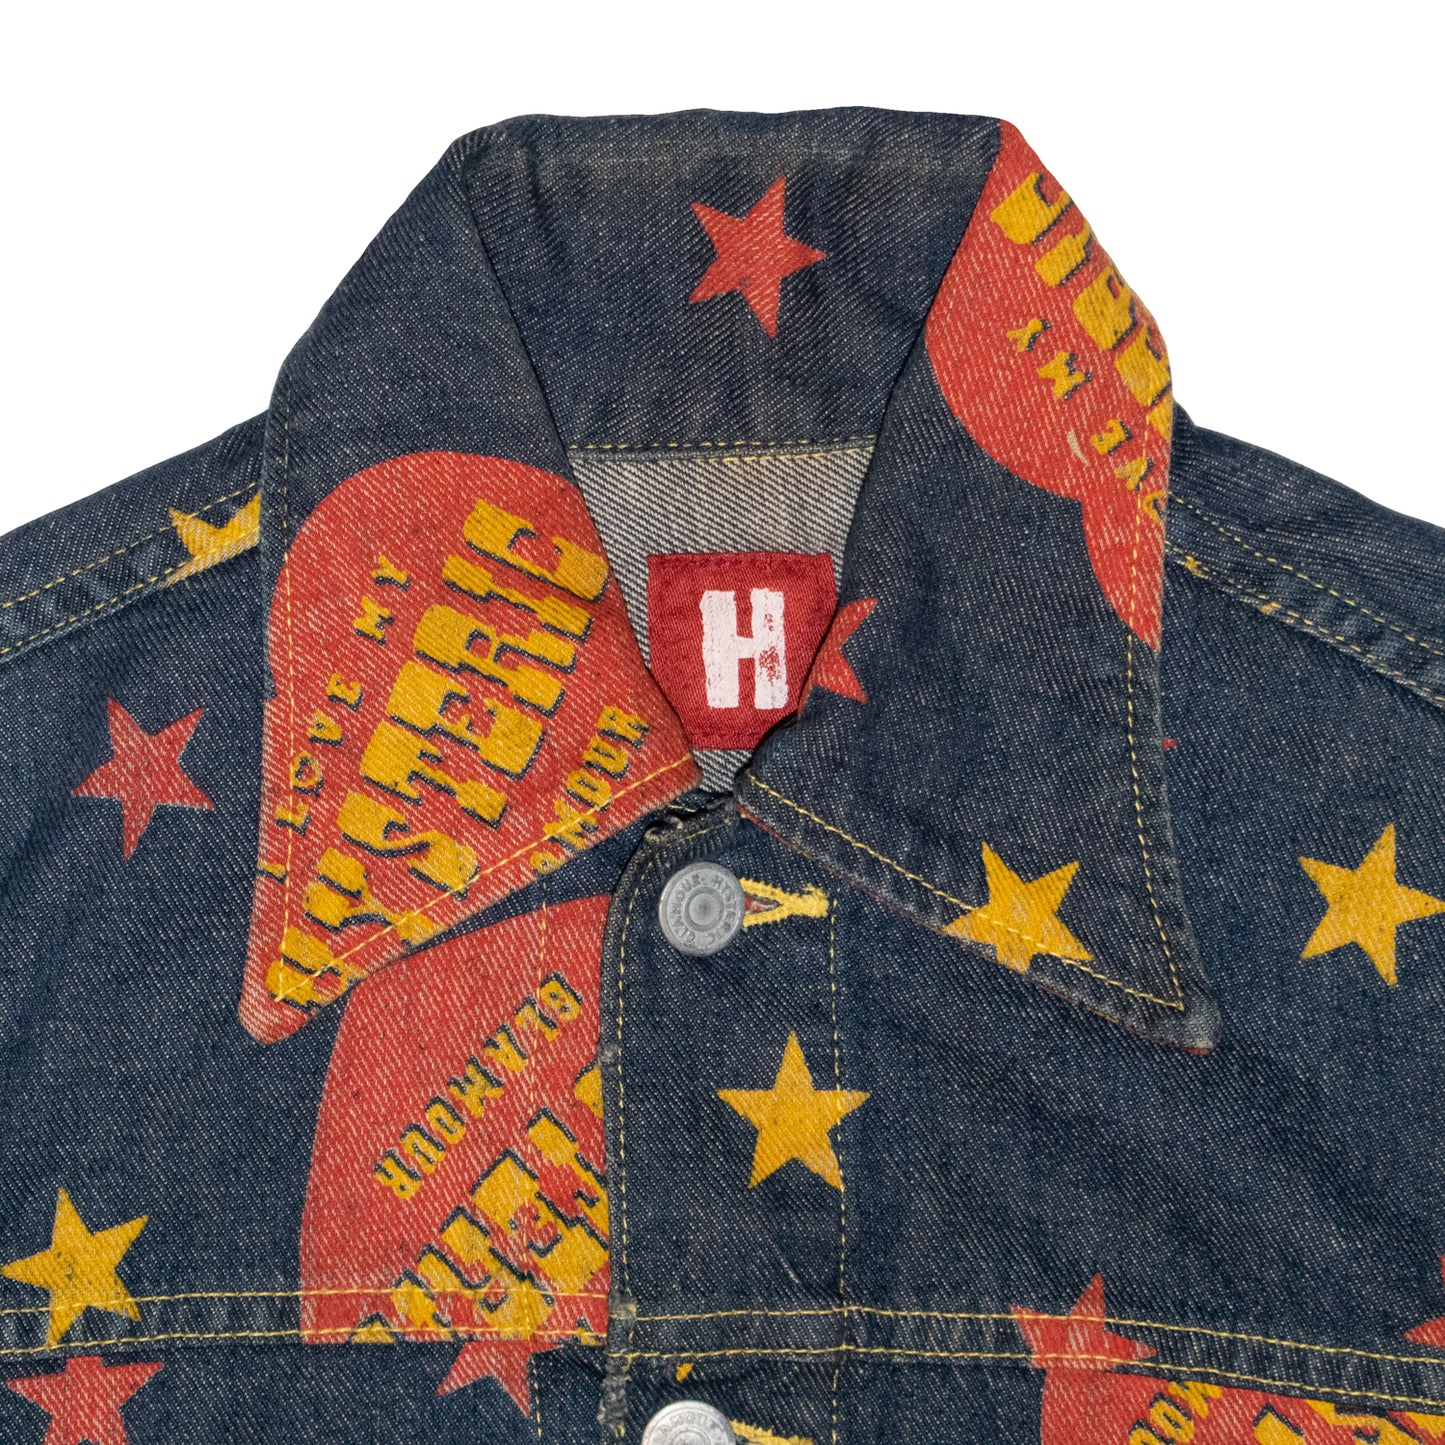 Hysteric Glamour I Love My Hysteric Denim Jacket – 1990s